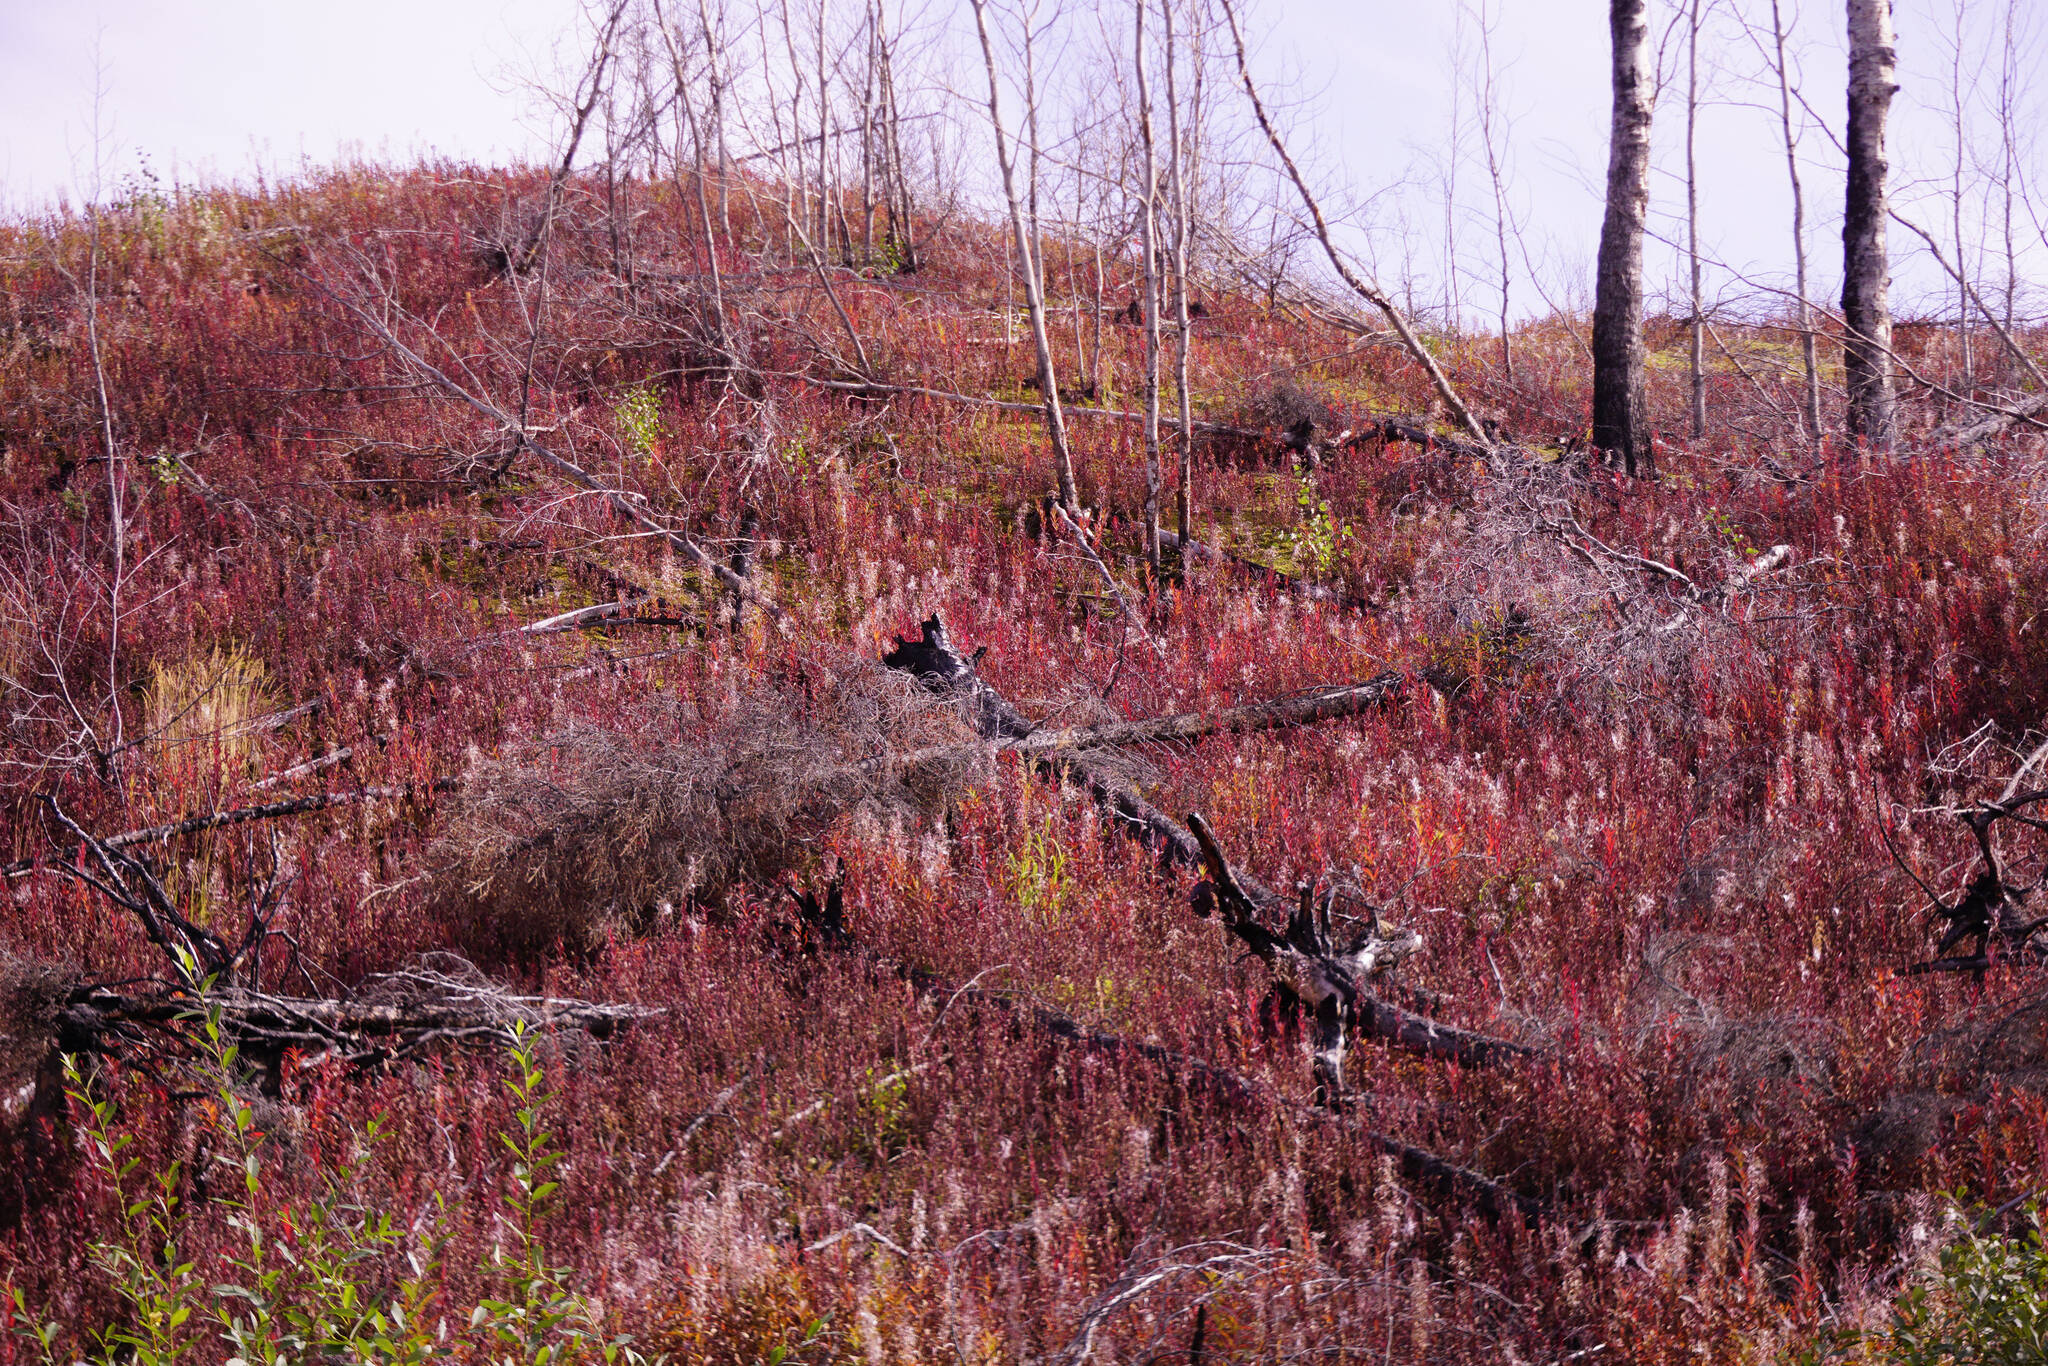 Fireweed past its bloom contrasts with a burned area along the Skilak Lake Road on Saturday, Sept. 11, 2021, near Sterling, Alaska. (Photo by Michael Armstrong/Homer News)